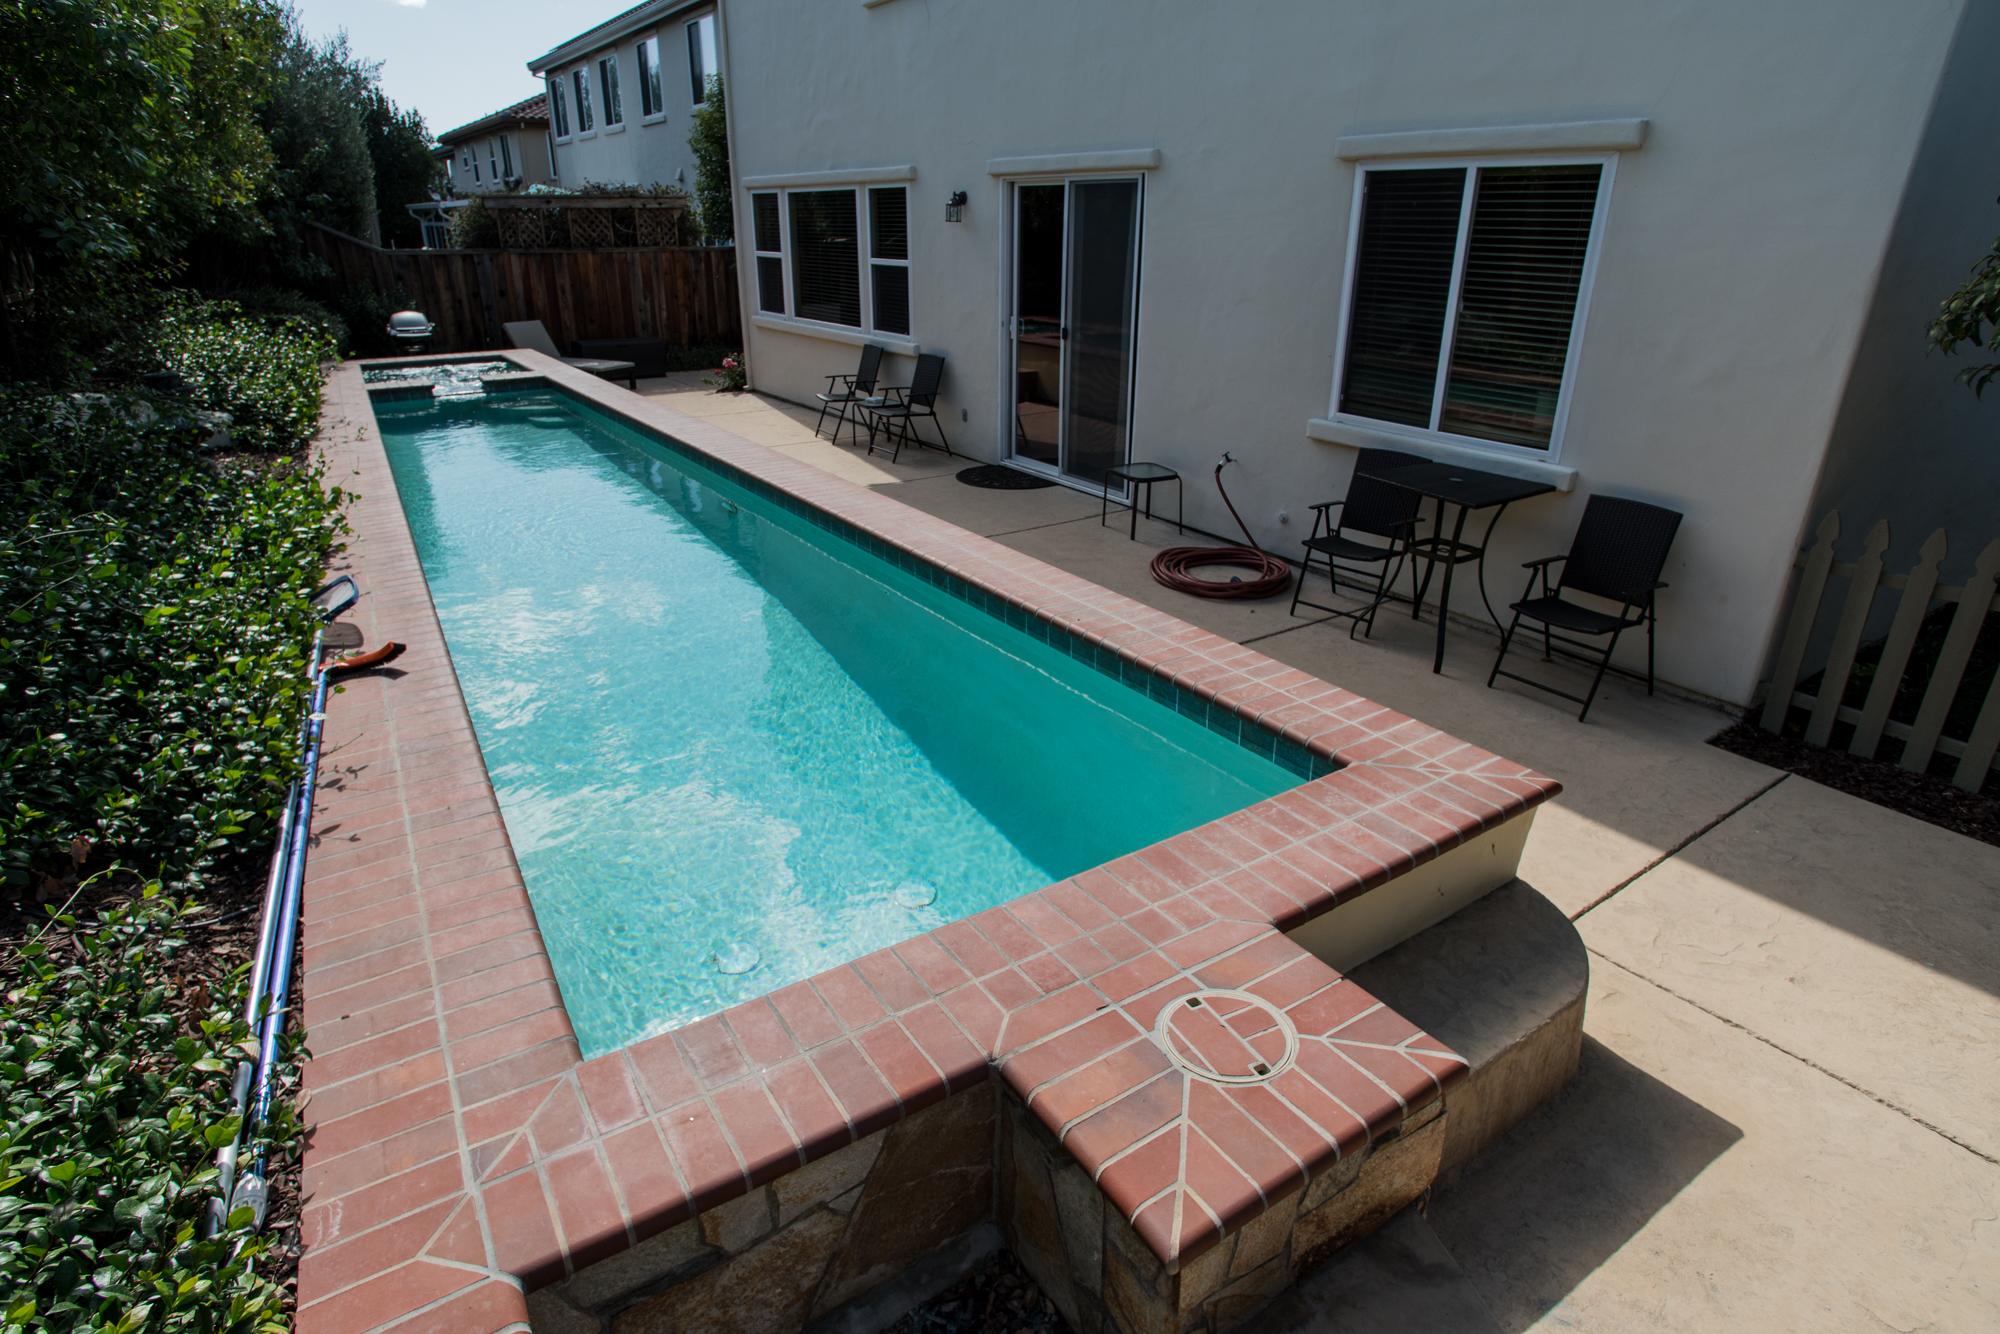 Property Image 1 - Gather Friends Around Pool and Spa